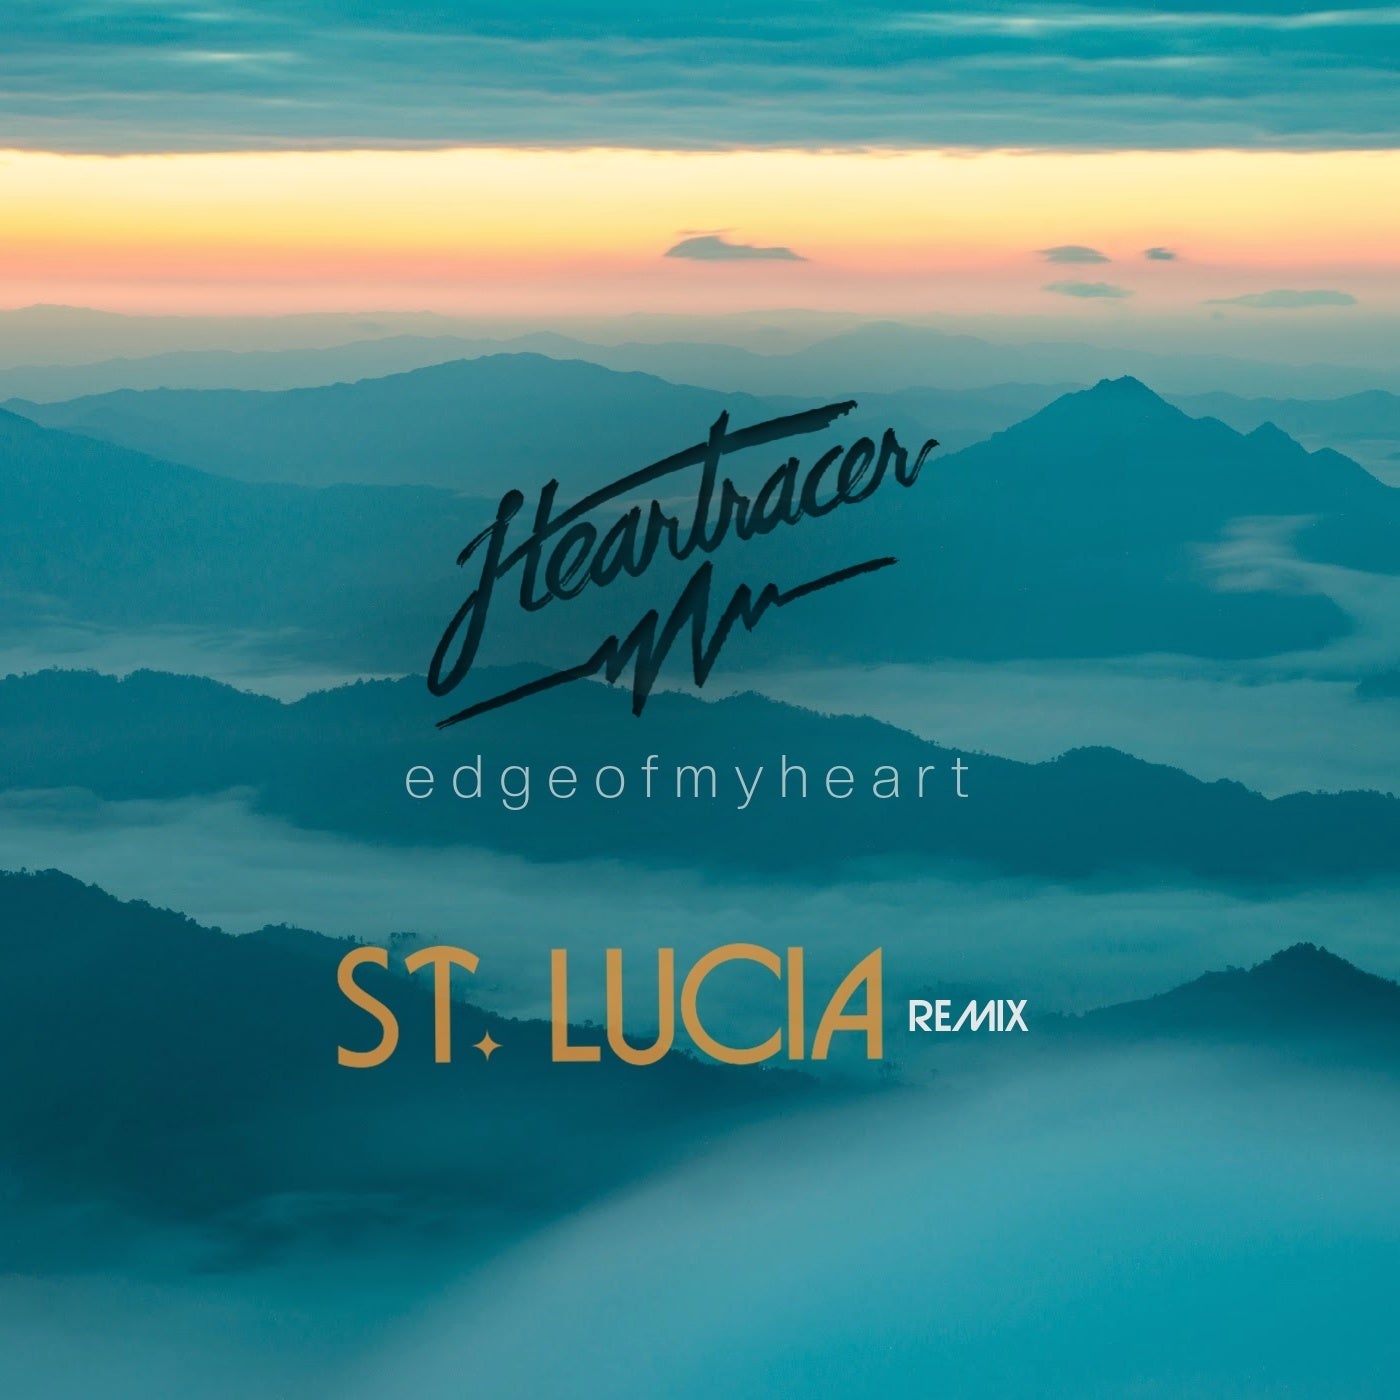 Edge of My Heart - St. Lucia Remix